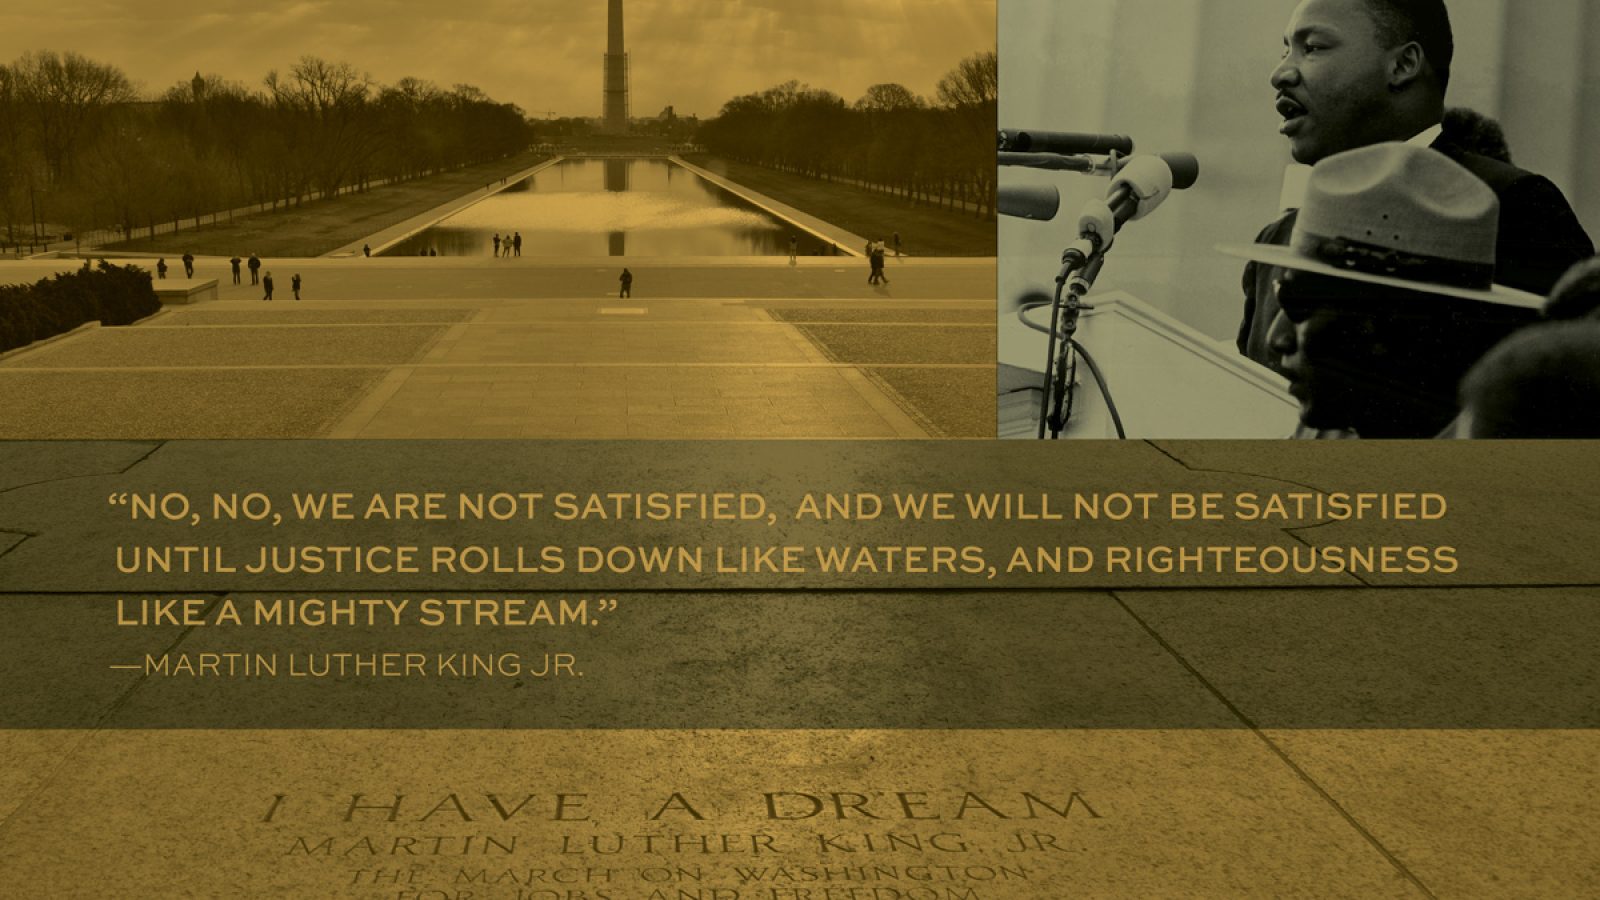 View of Washington Monument with reflecting pool (left); Quote from Dr. Martin Luther King (center); r. Martin Luther King speaks at an event in Washington, DC (right)